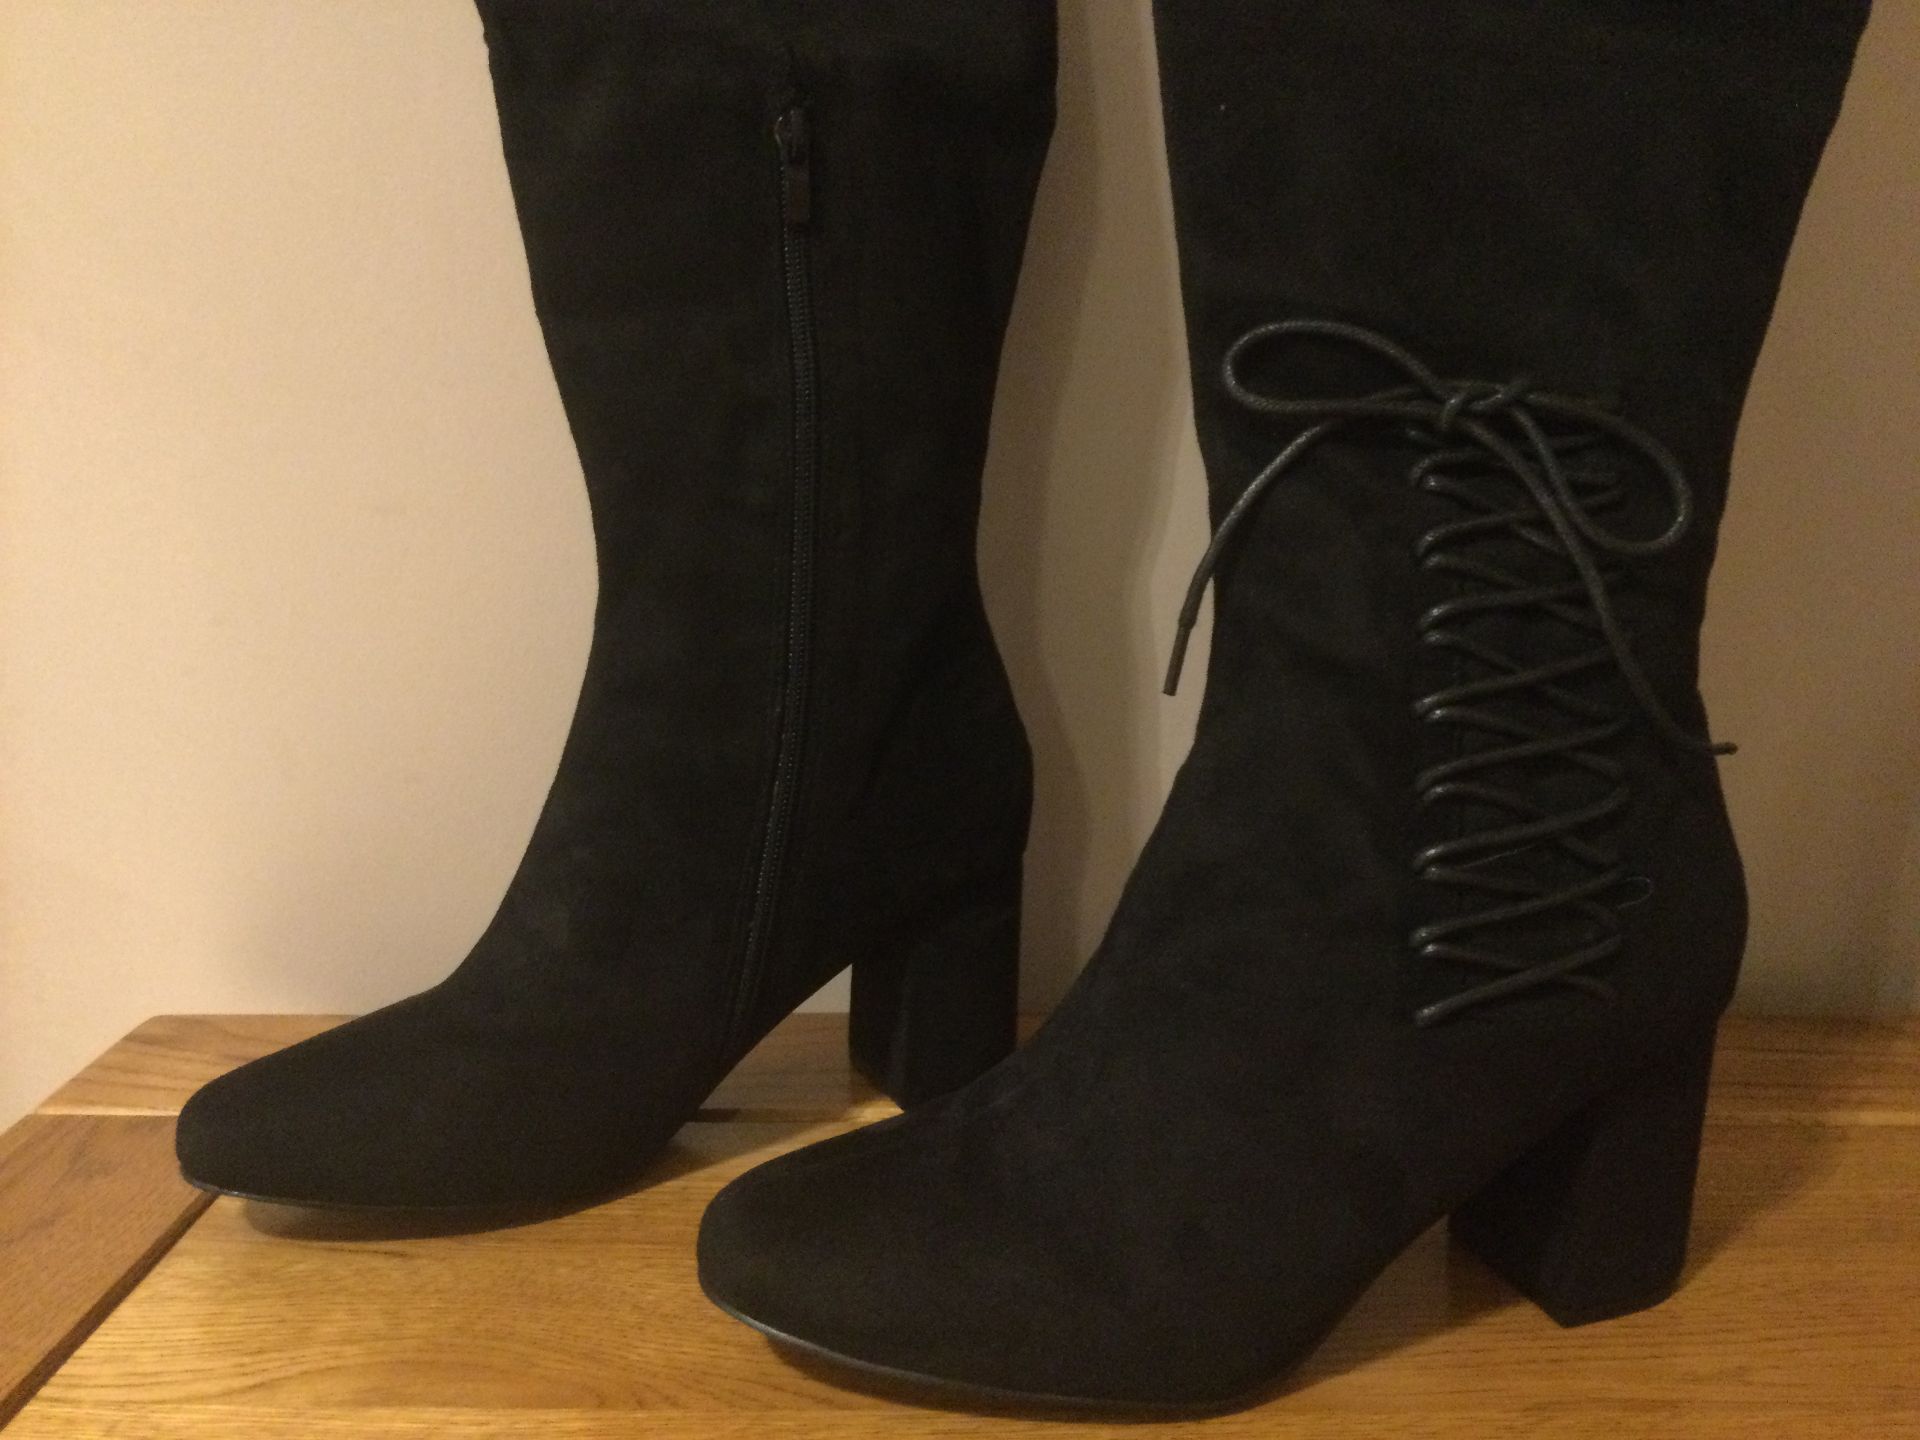 Dolcis “Emma” Long Boots, Block Heel, Size 4, Black - New RRP £55.00 - Image 3 of 7